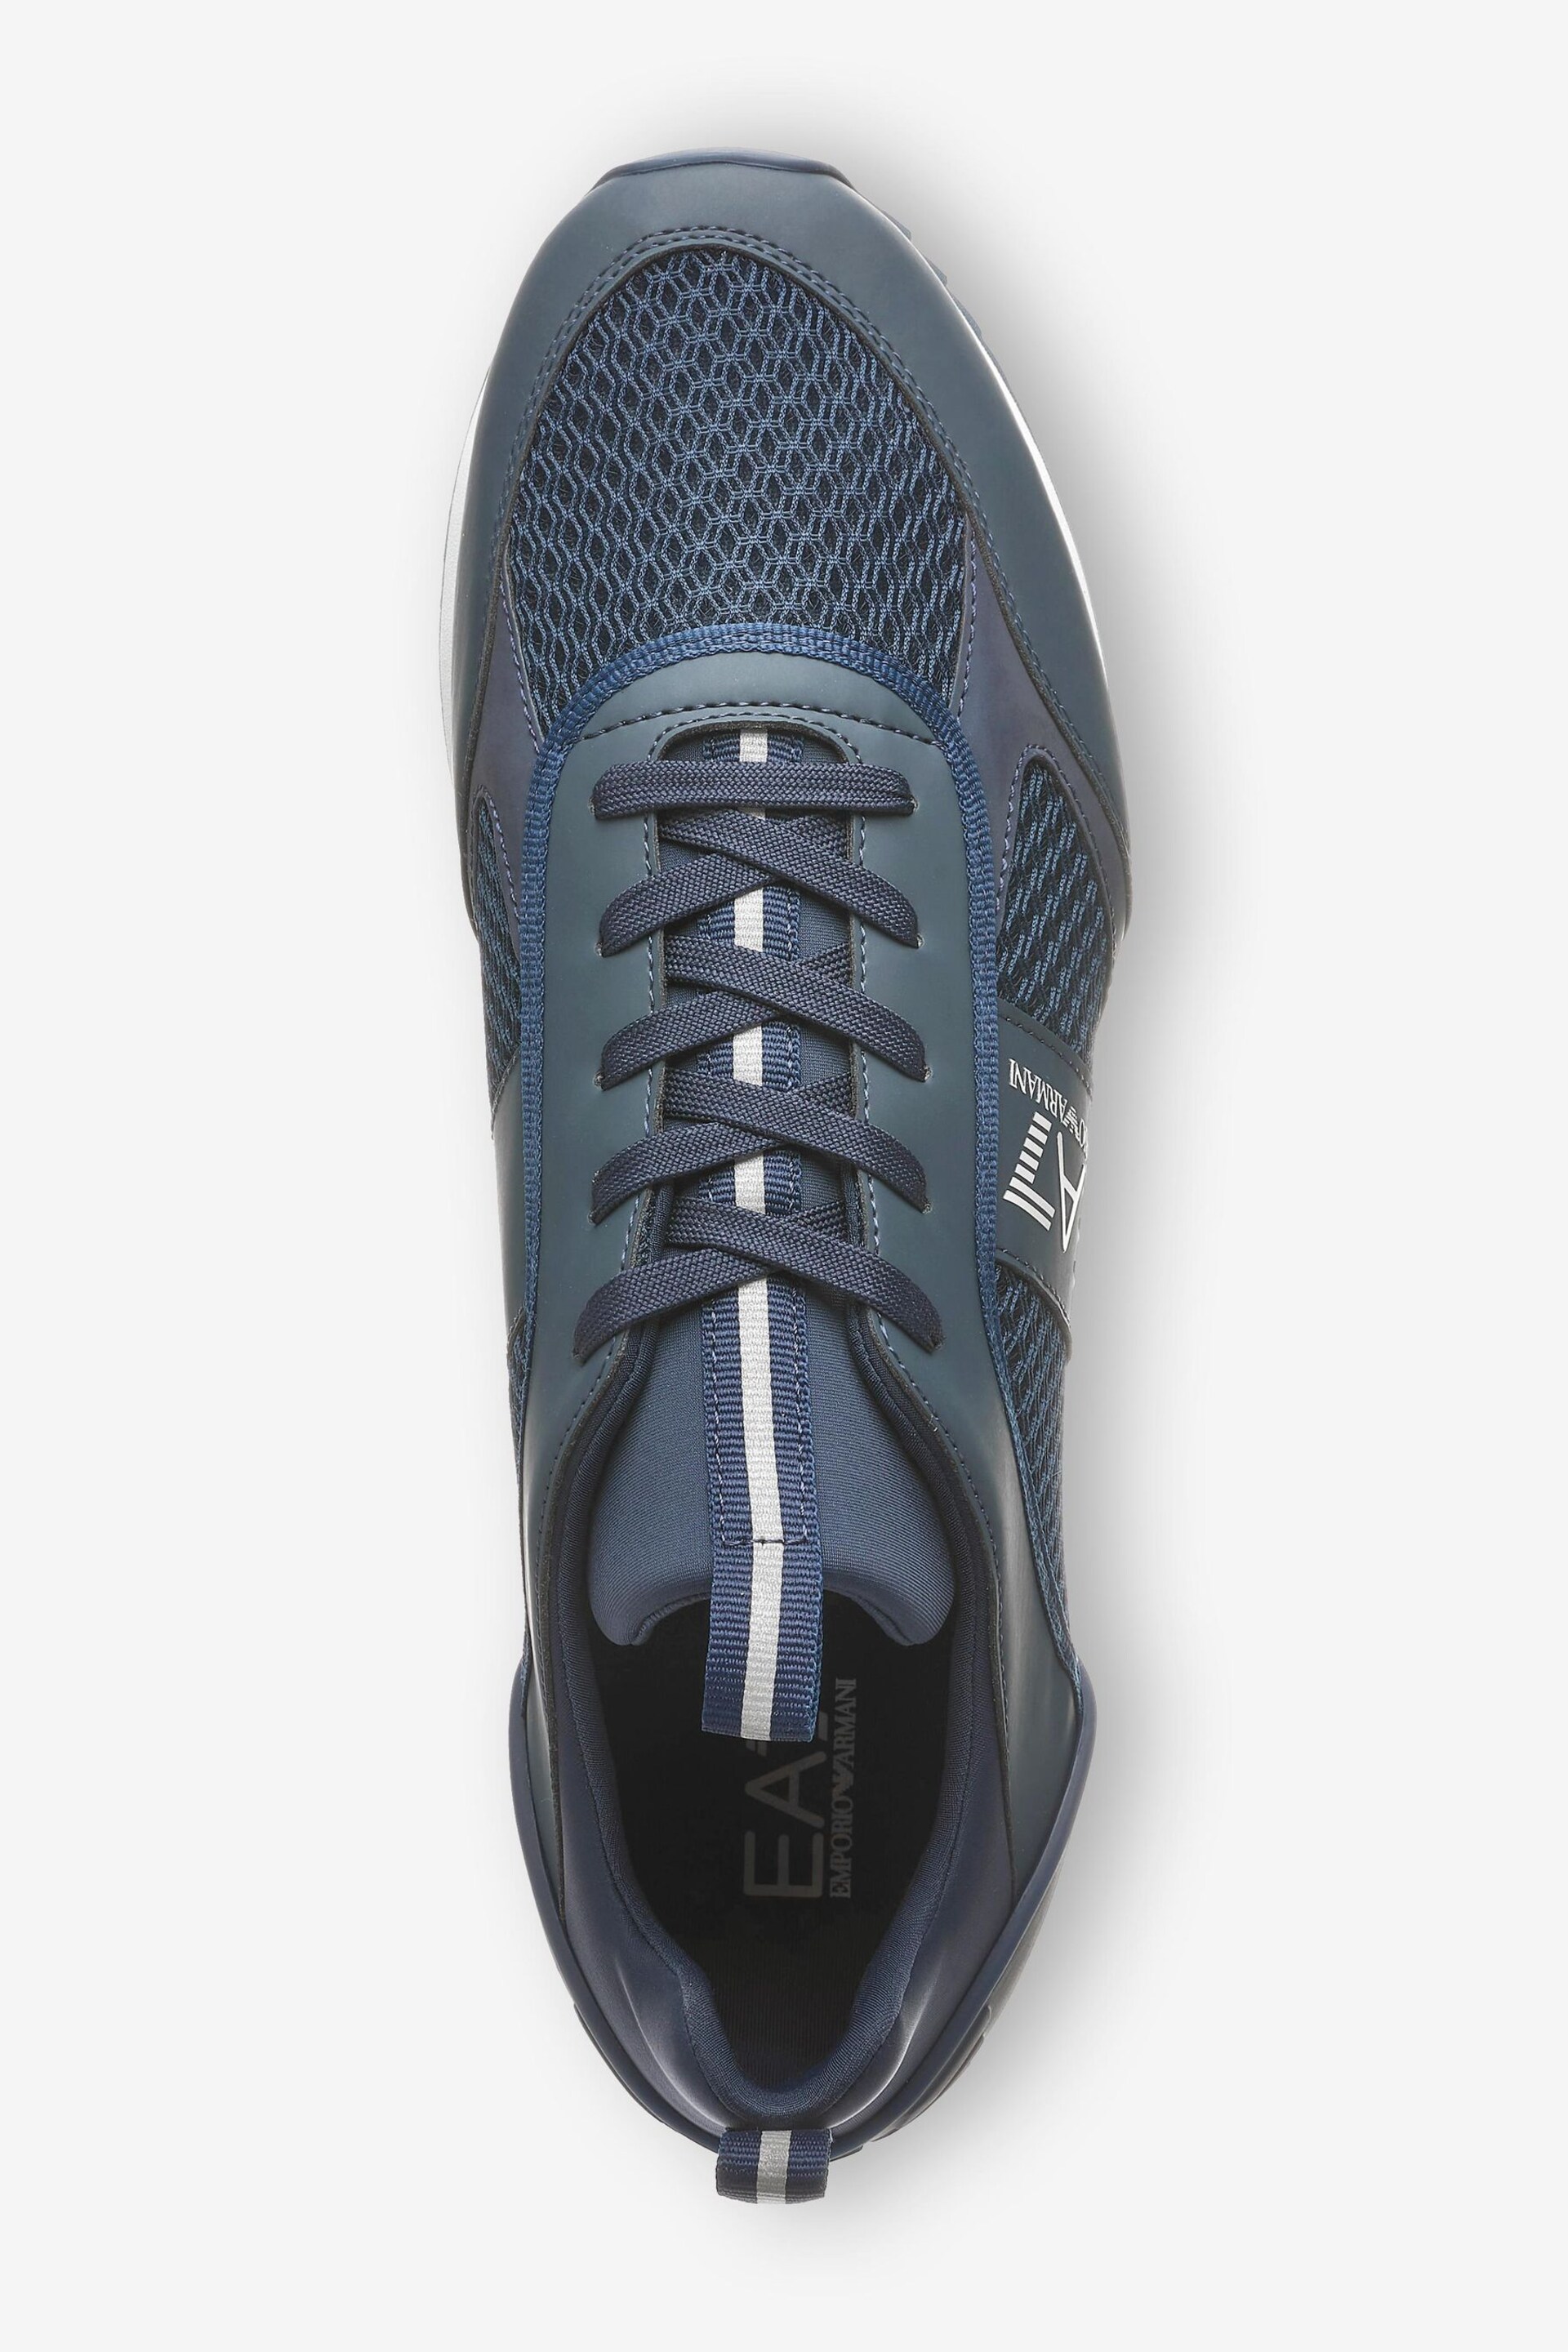 Emporio Armani EA7 Evolution Lace-Up Racer Trainers - Image 3 of 4